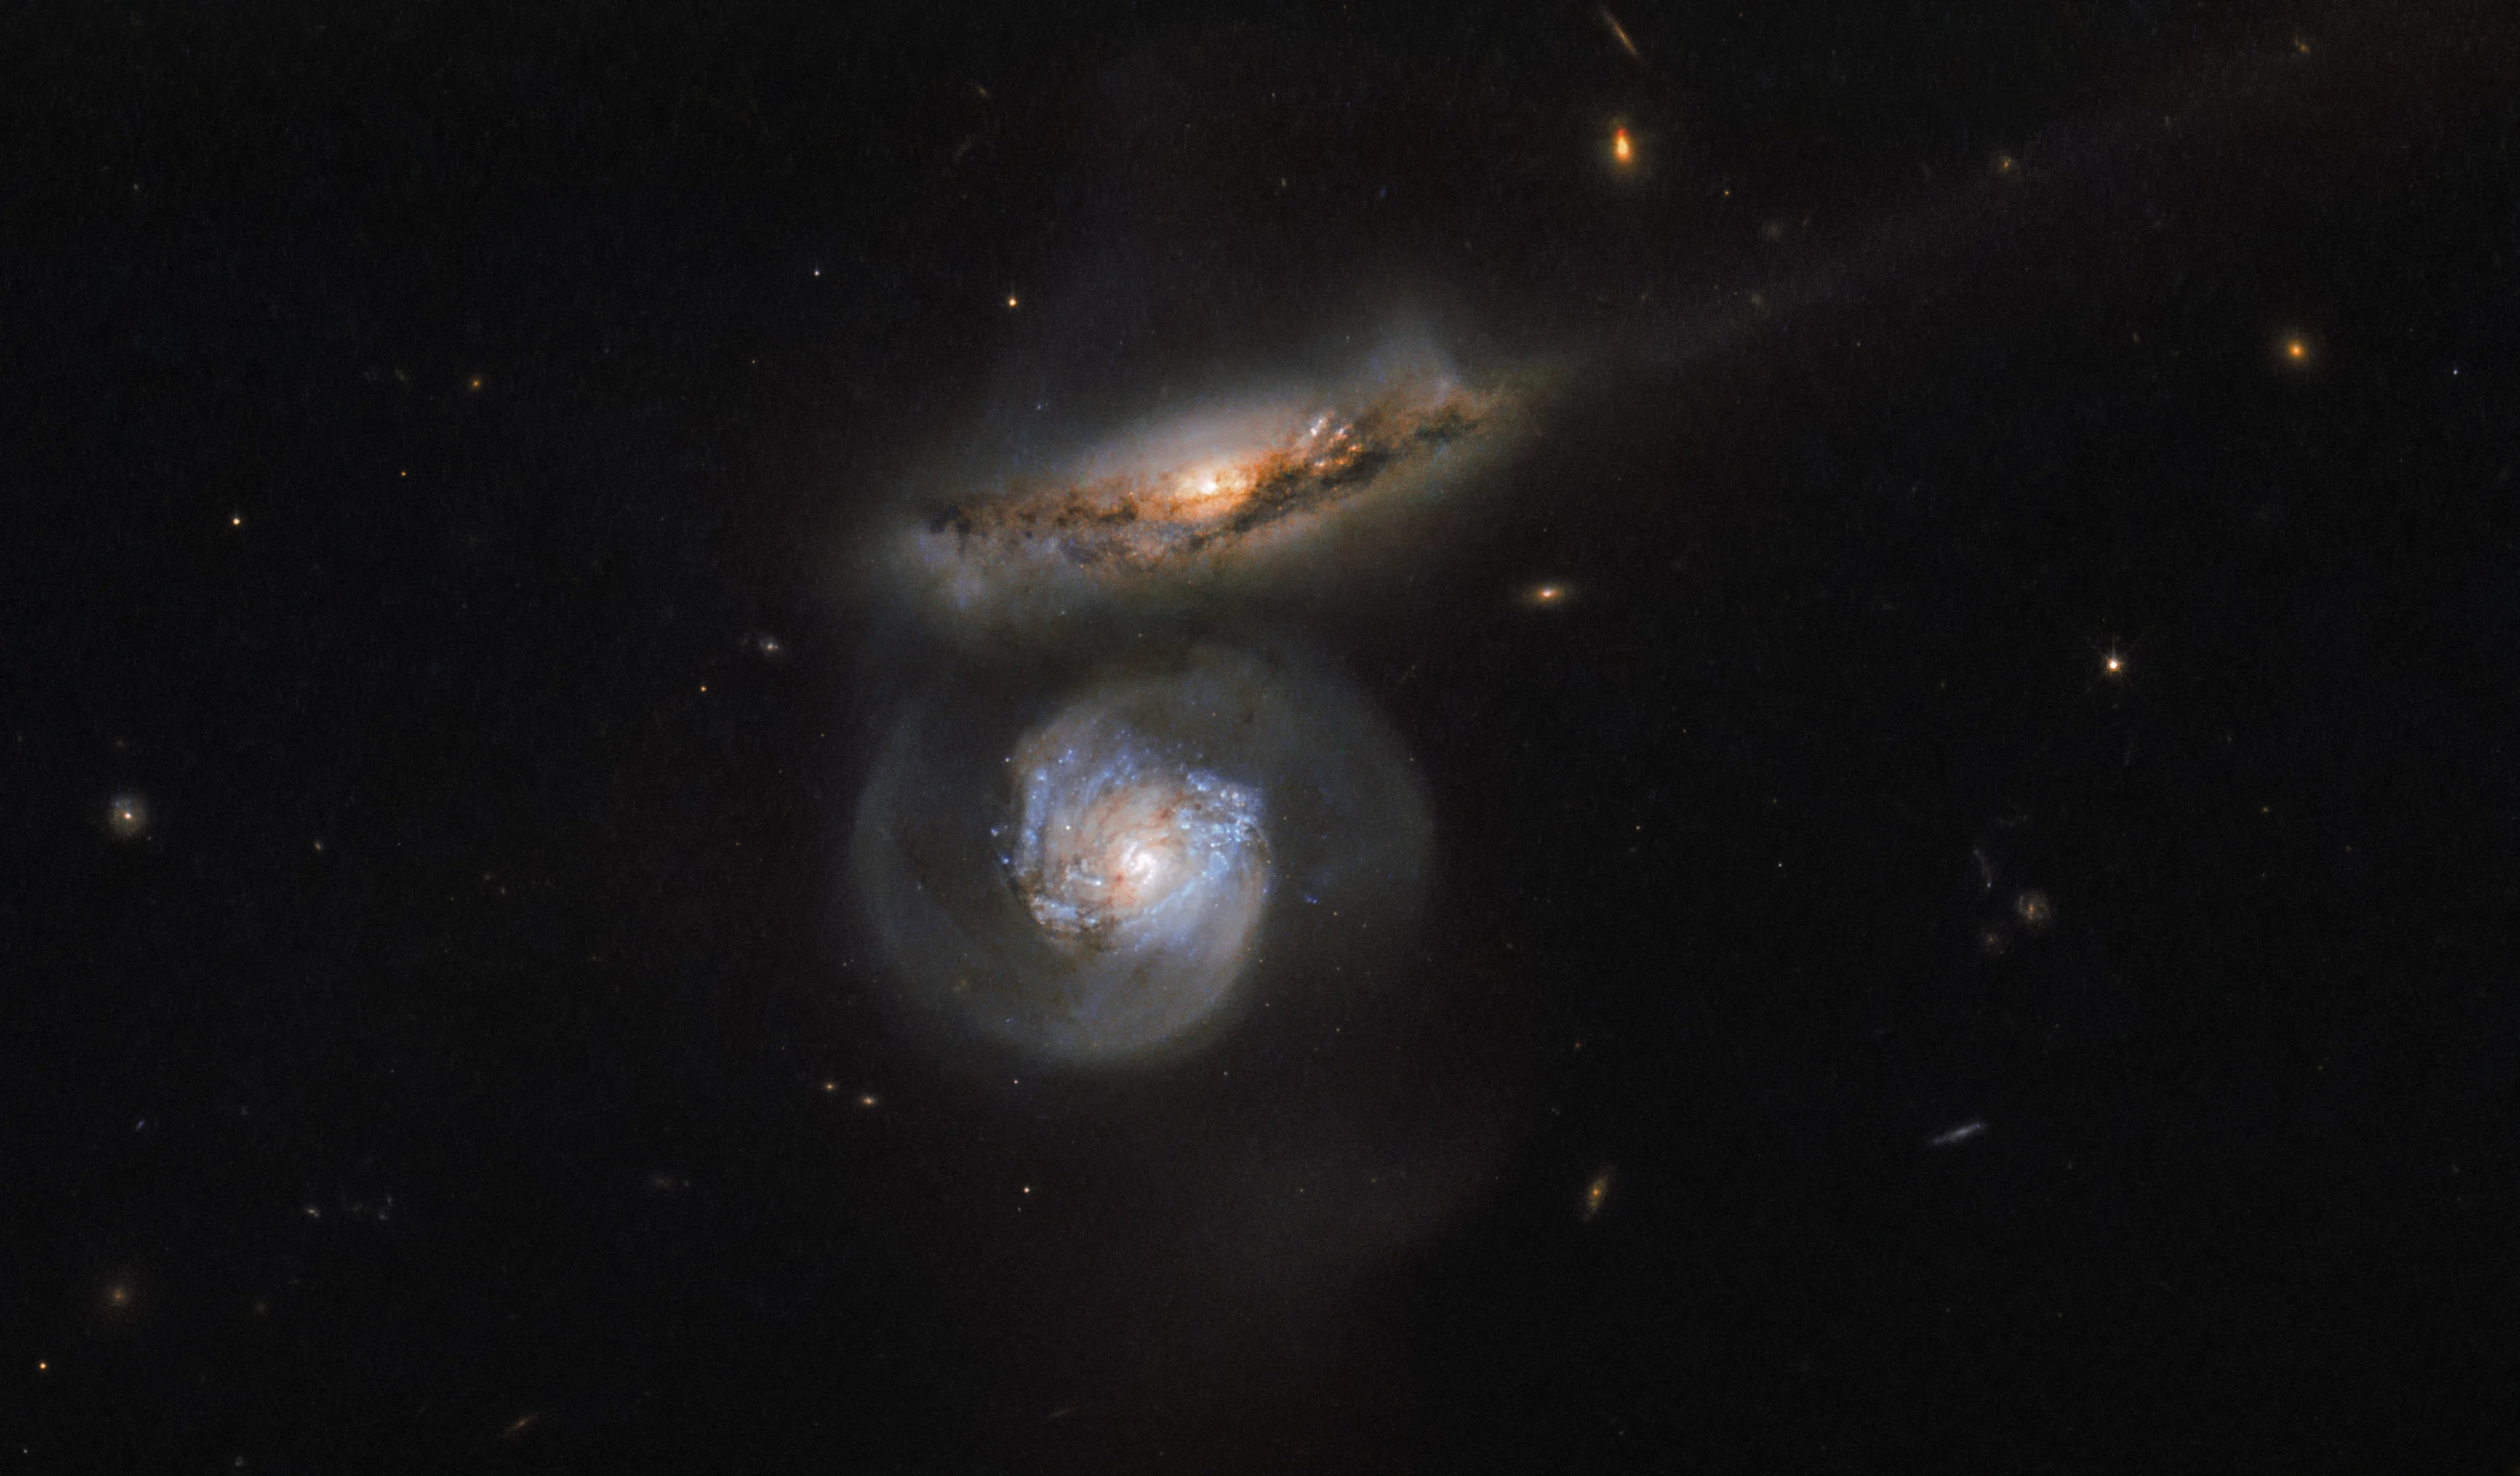 Two galaxies, one head on and one edge on